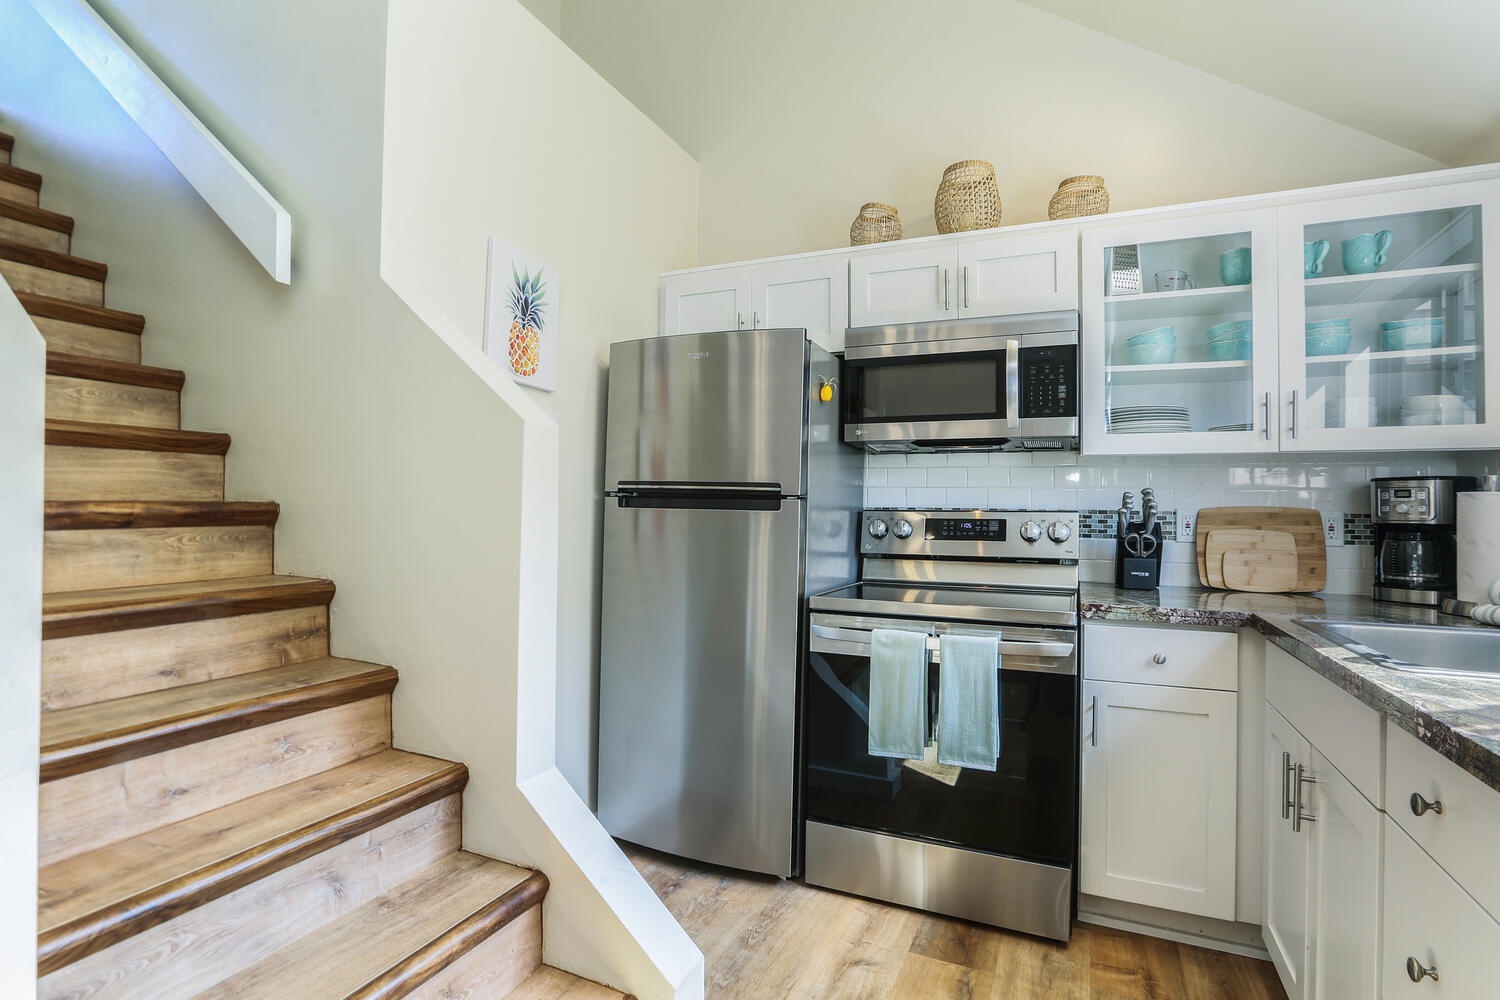 Princeville Vacation Rentals, Sealodge J8 - Fully equipped kitchen with stainless steel appliances